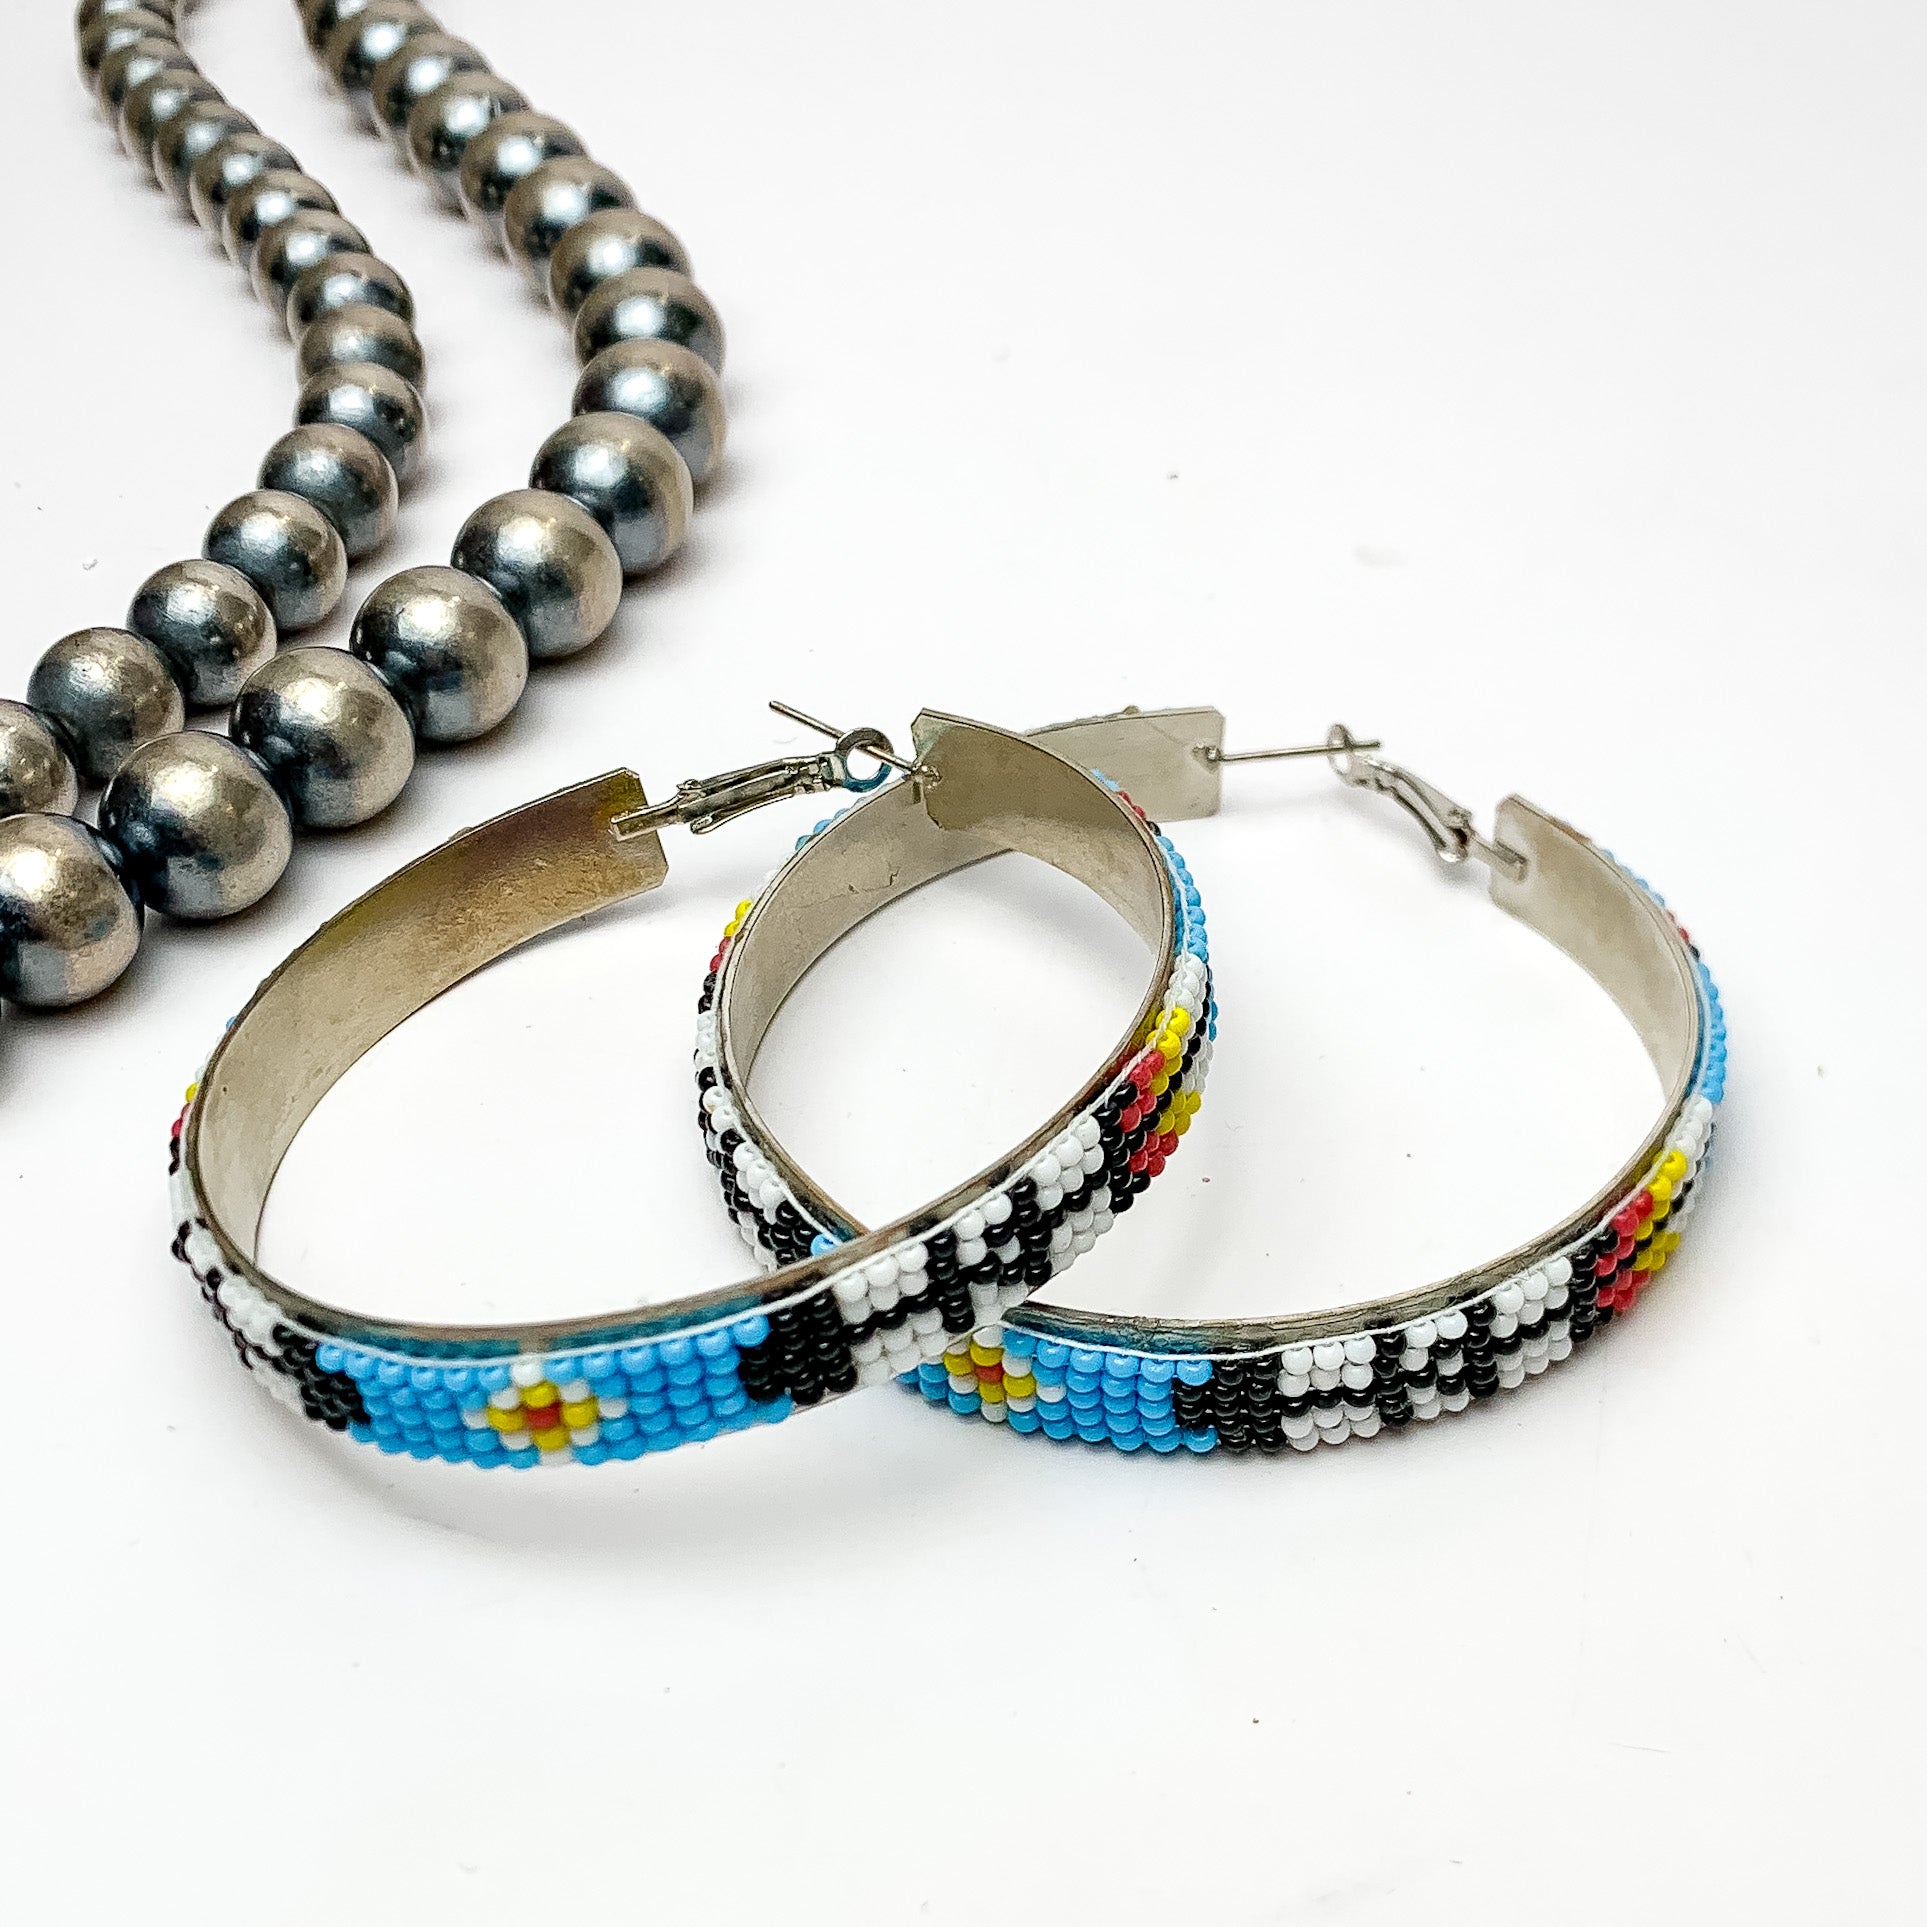 Aztec Pattern Beaded Hoop Earrings in Multicolor.  Pictured on a white background with Navajo pearls on the left side.